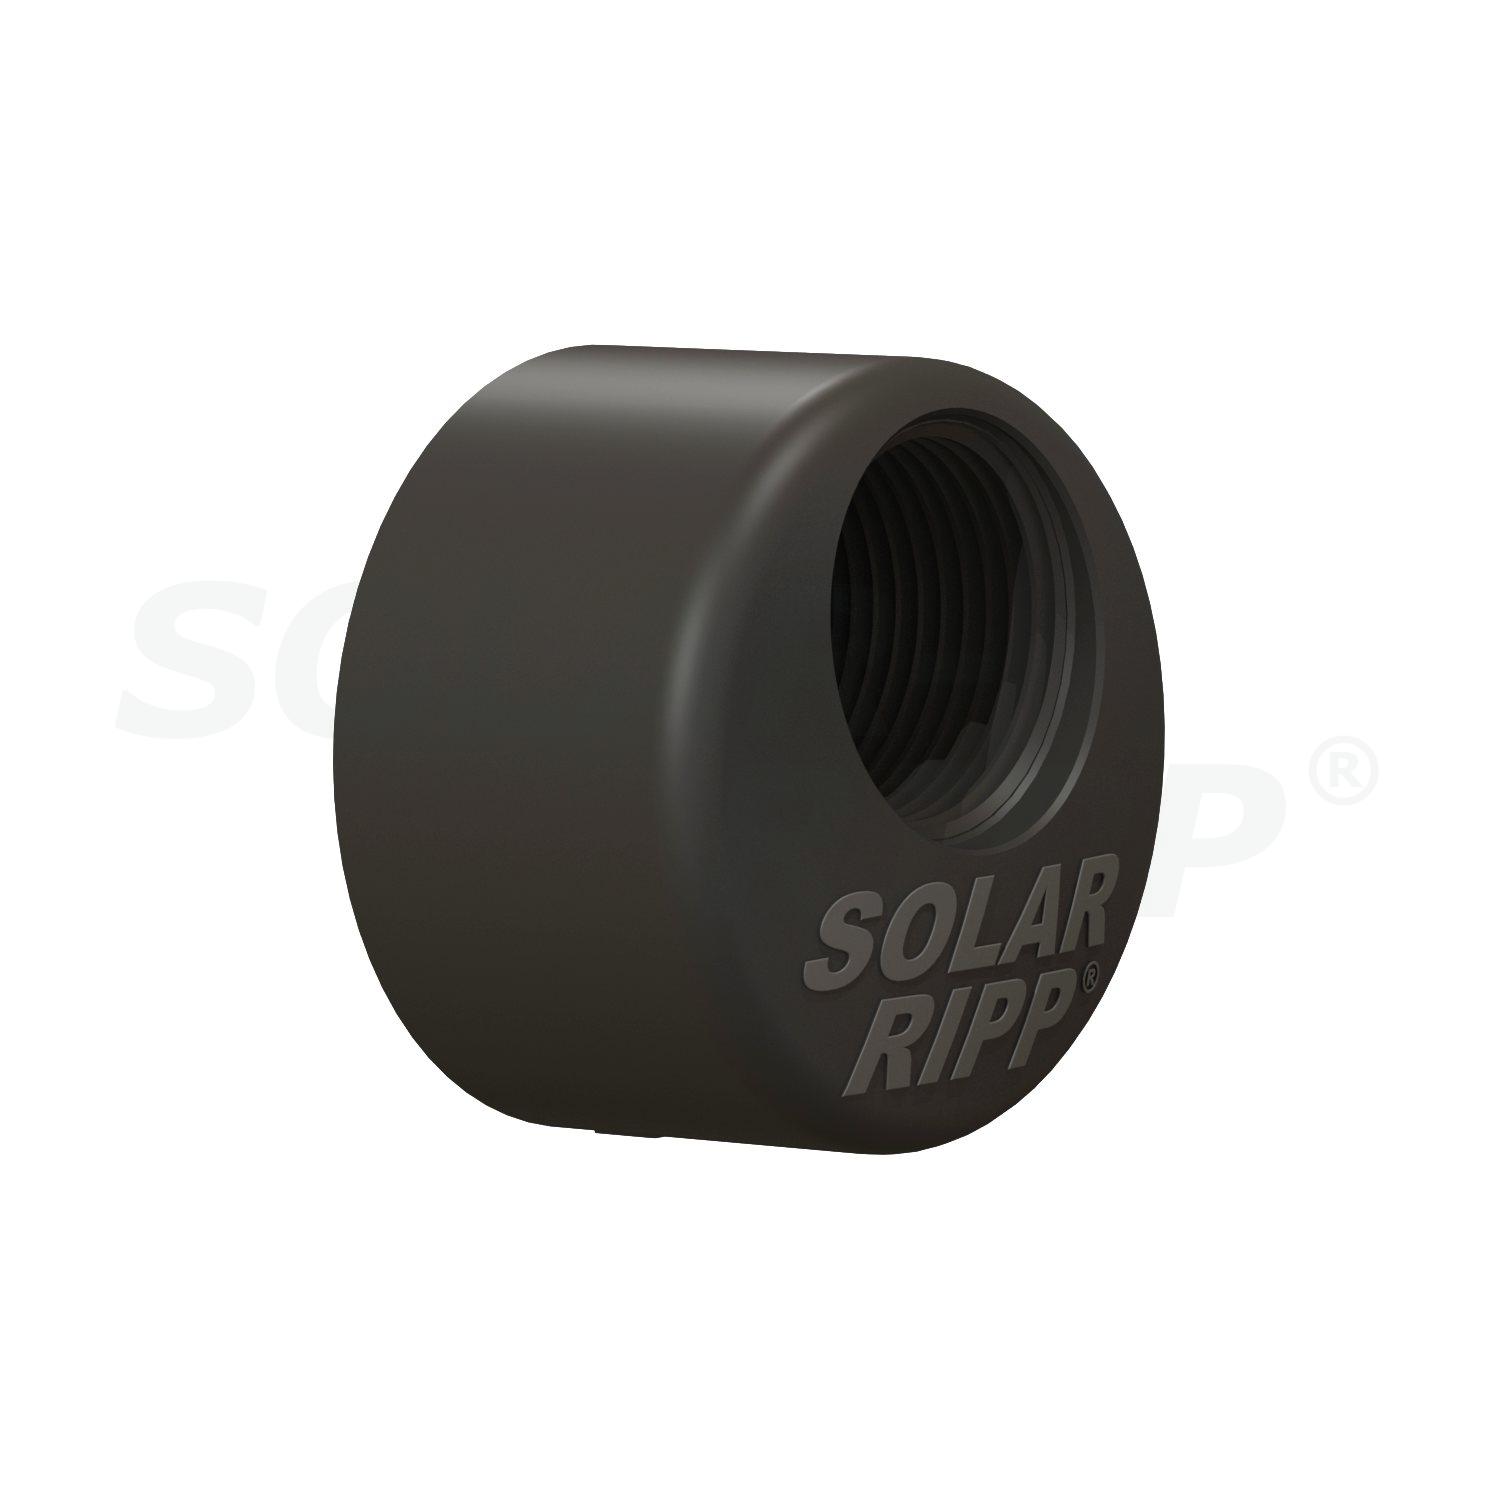 SOLAR-RIPP ® 50mm distributor end with 3/4" internal thread for welding